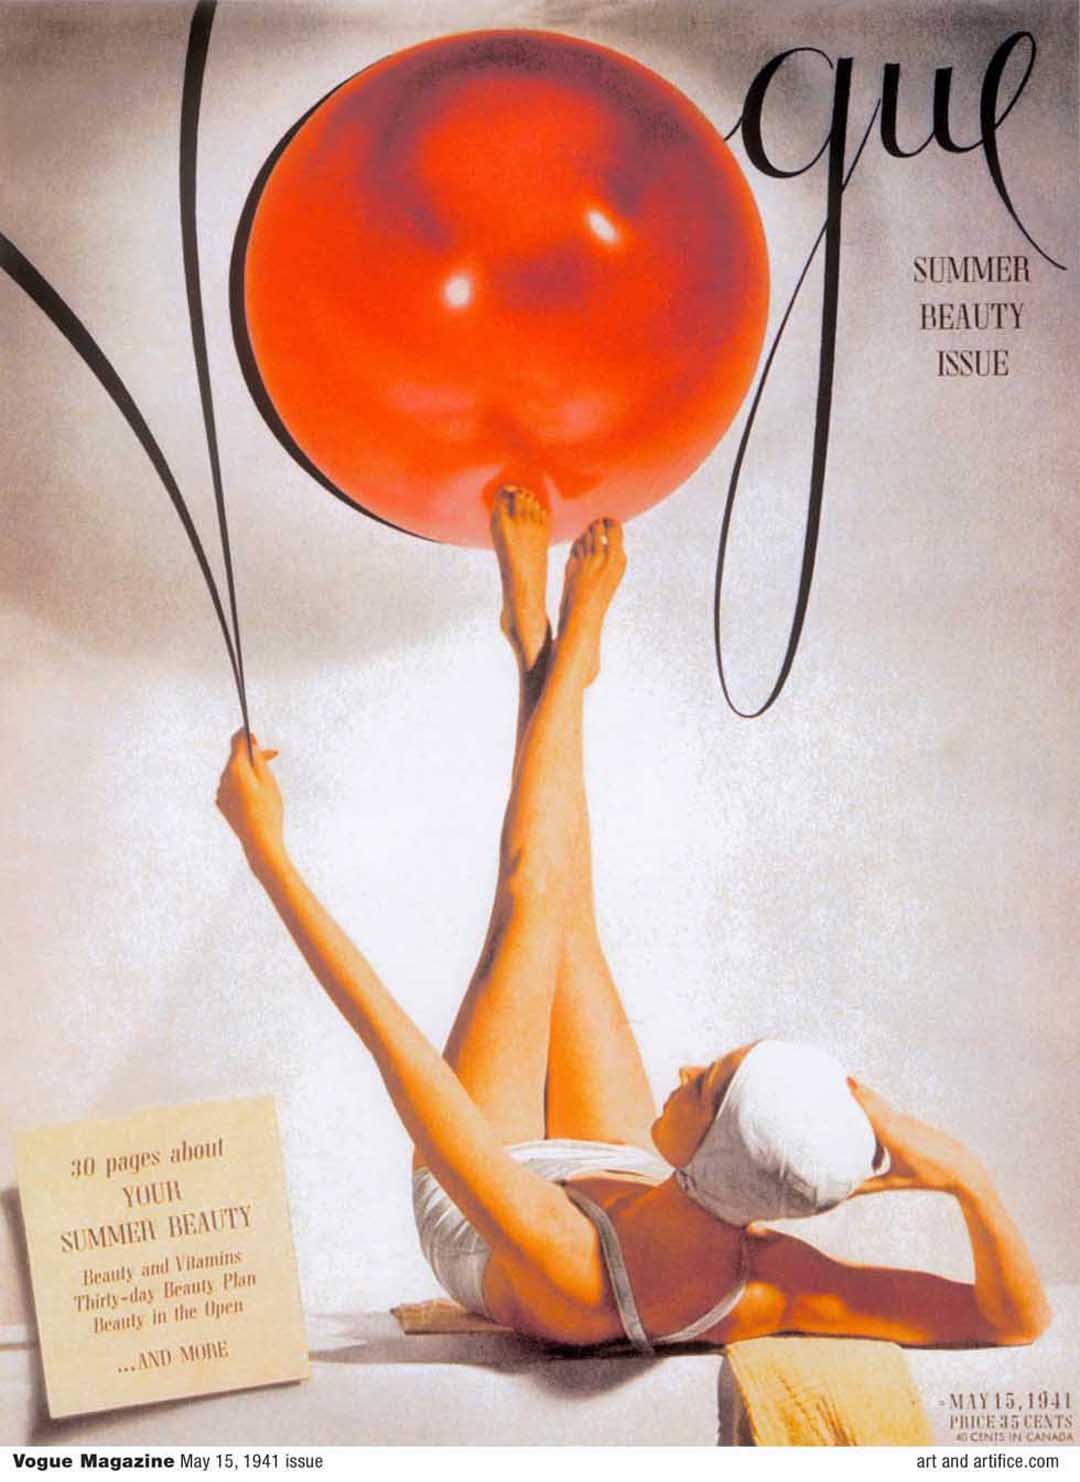 Vogue Magazine Summer Cover 1941 May 15